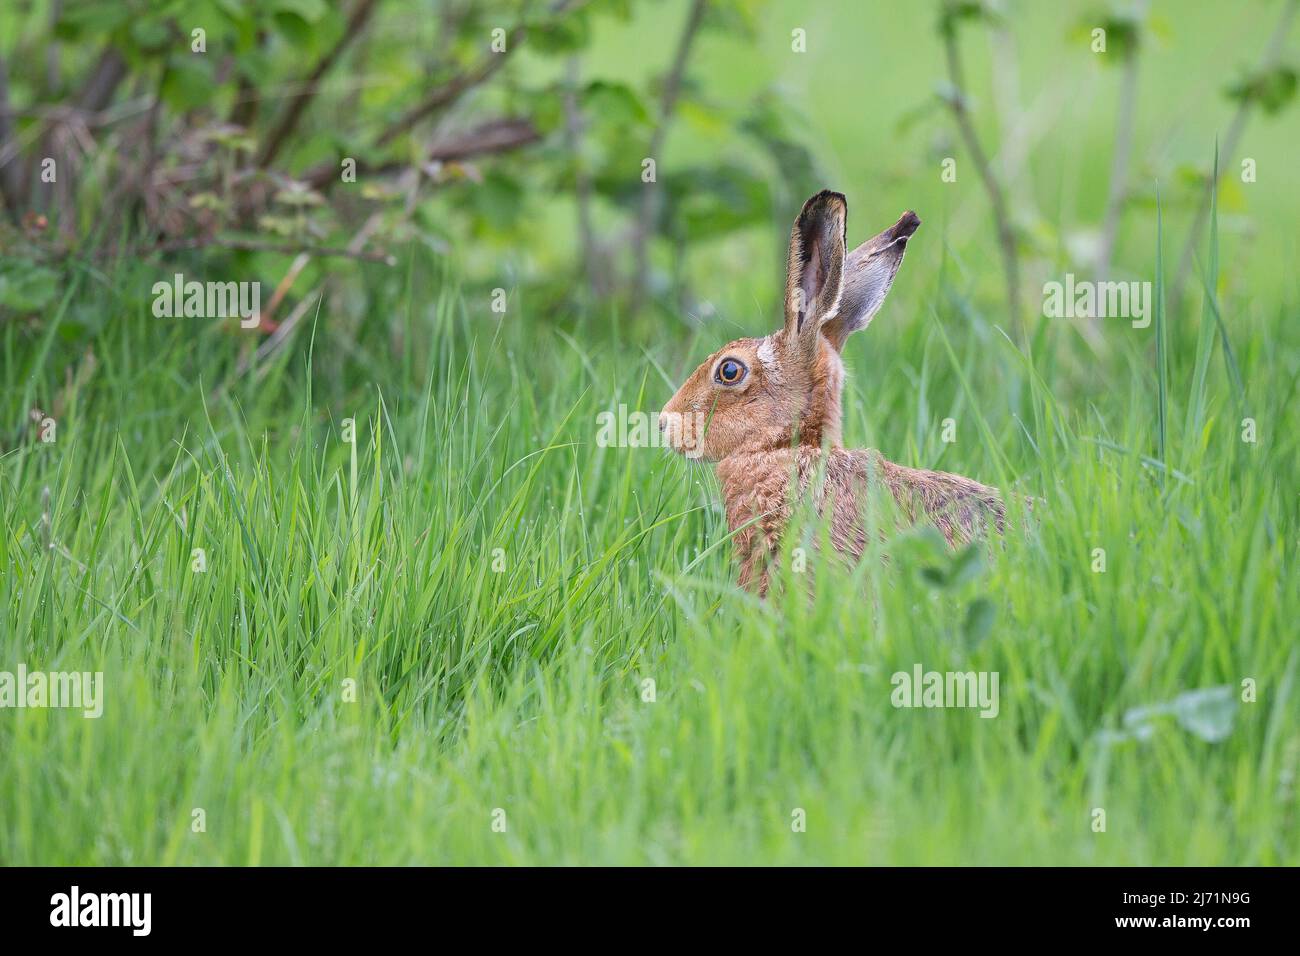 Side view of a wild brown hare (Lepus europaeus) on alert with ears pricked up in wet grass, UK countryside. Stock Photo